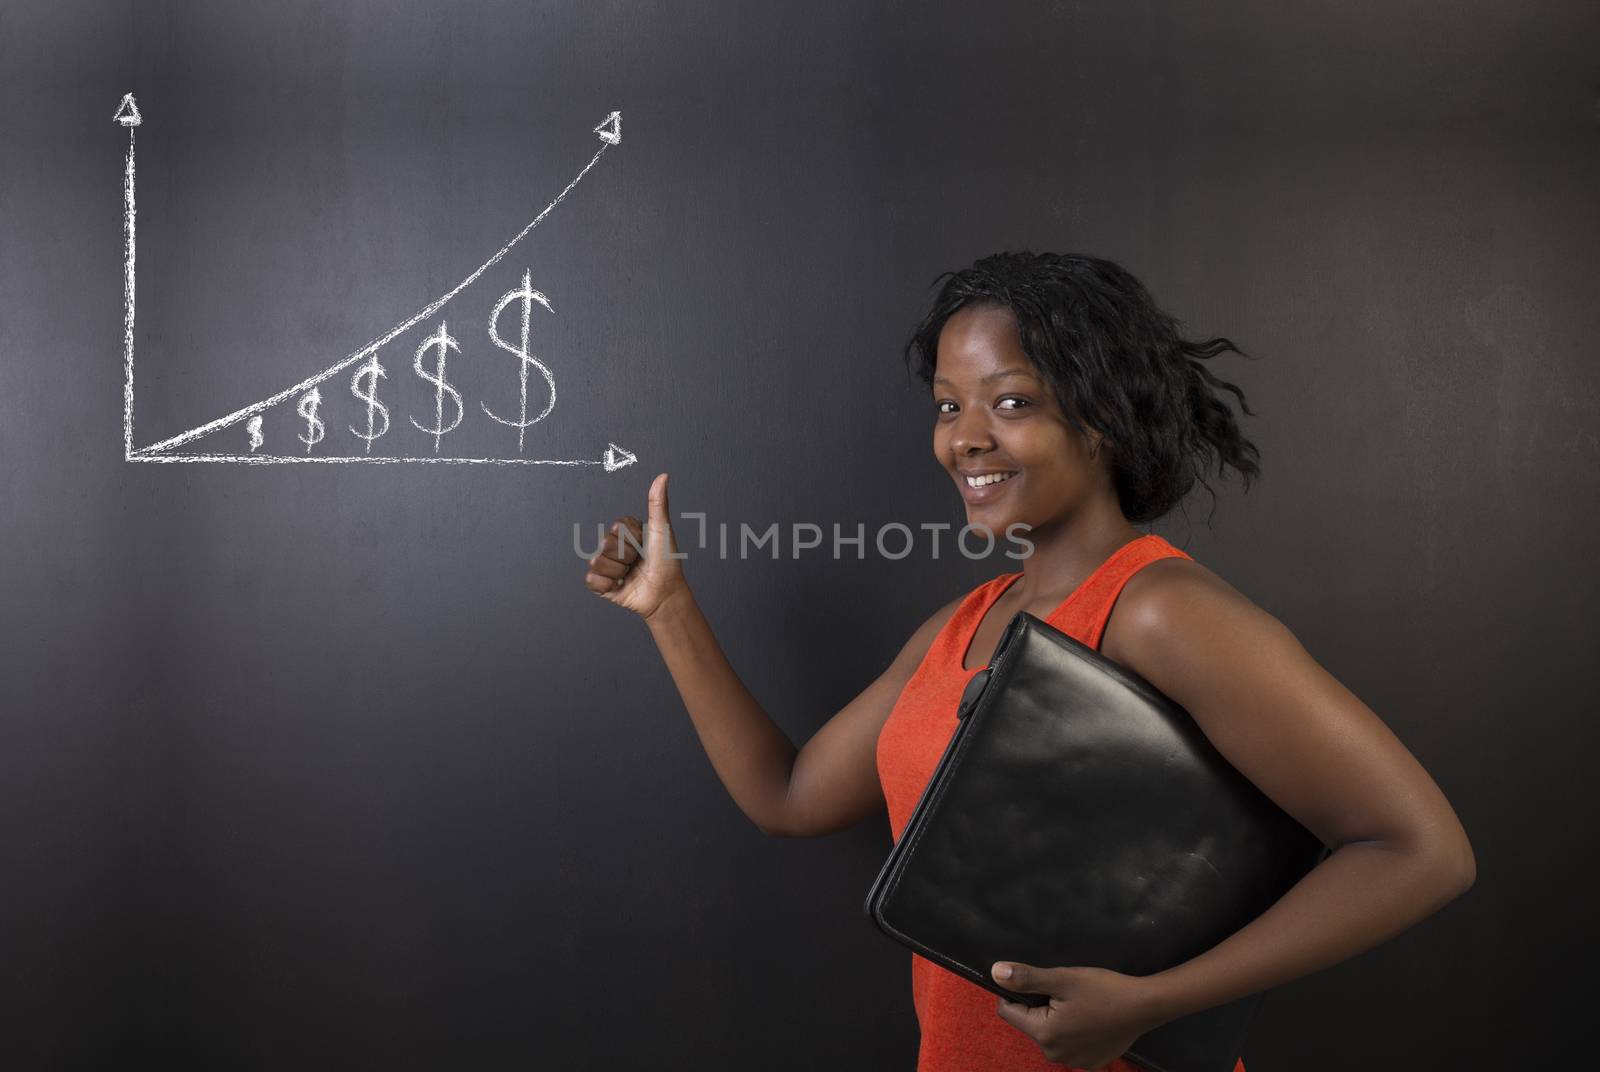 South African or African American woman teacher or student thumbs up holding a diary or book against a blackboard background with a chalk money graph